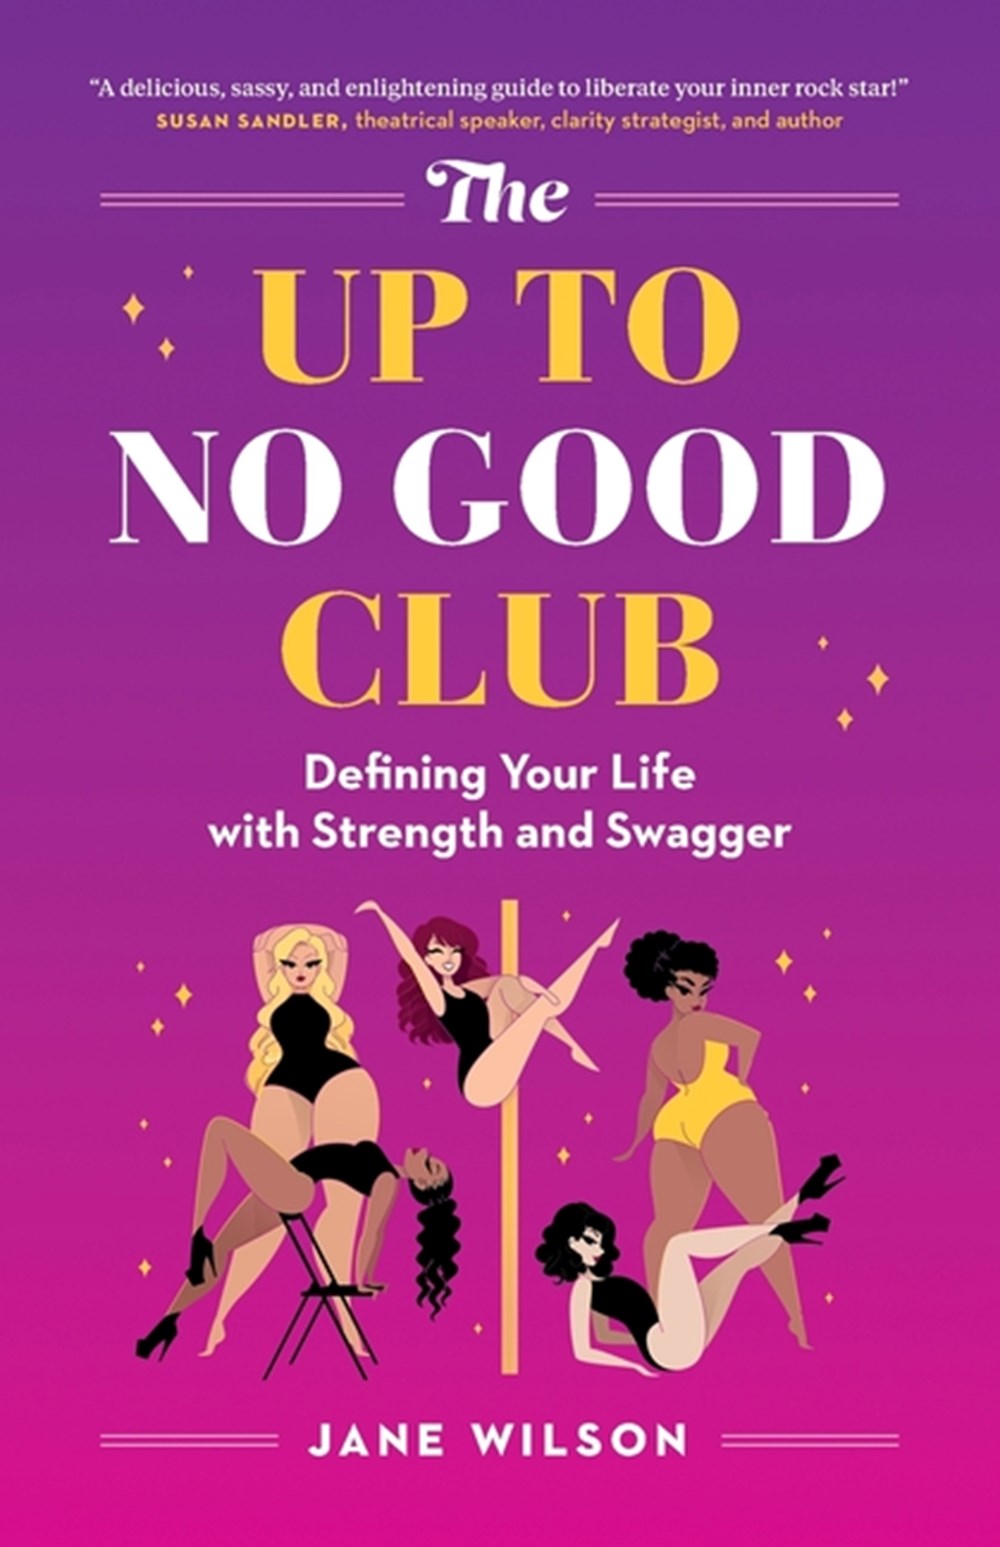 Up To No Good Club: Defining Your Life With Strength and Swagger